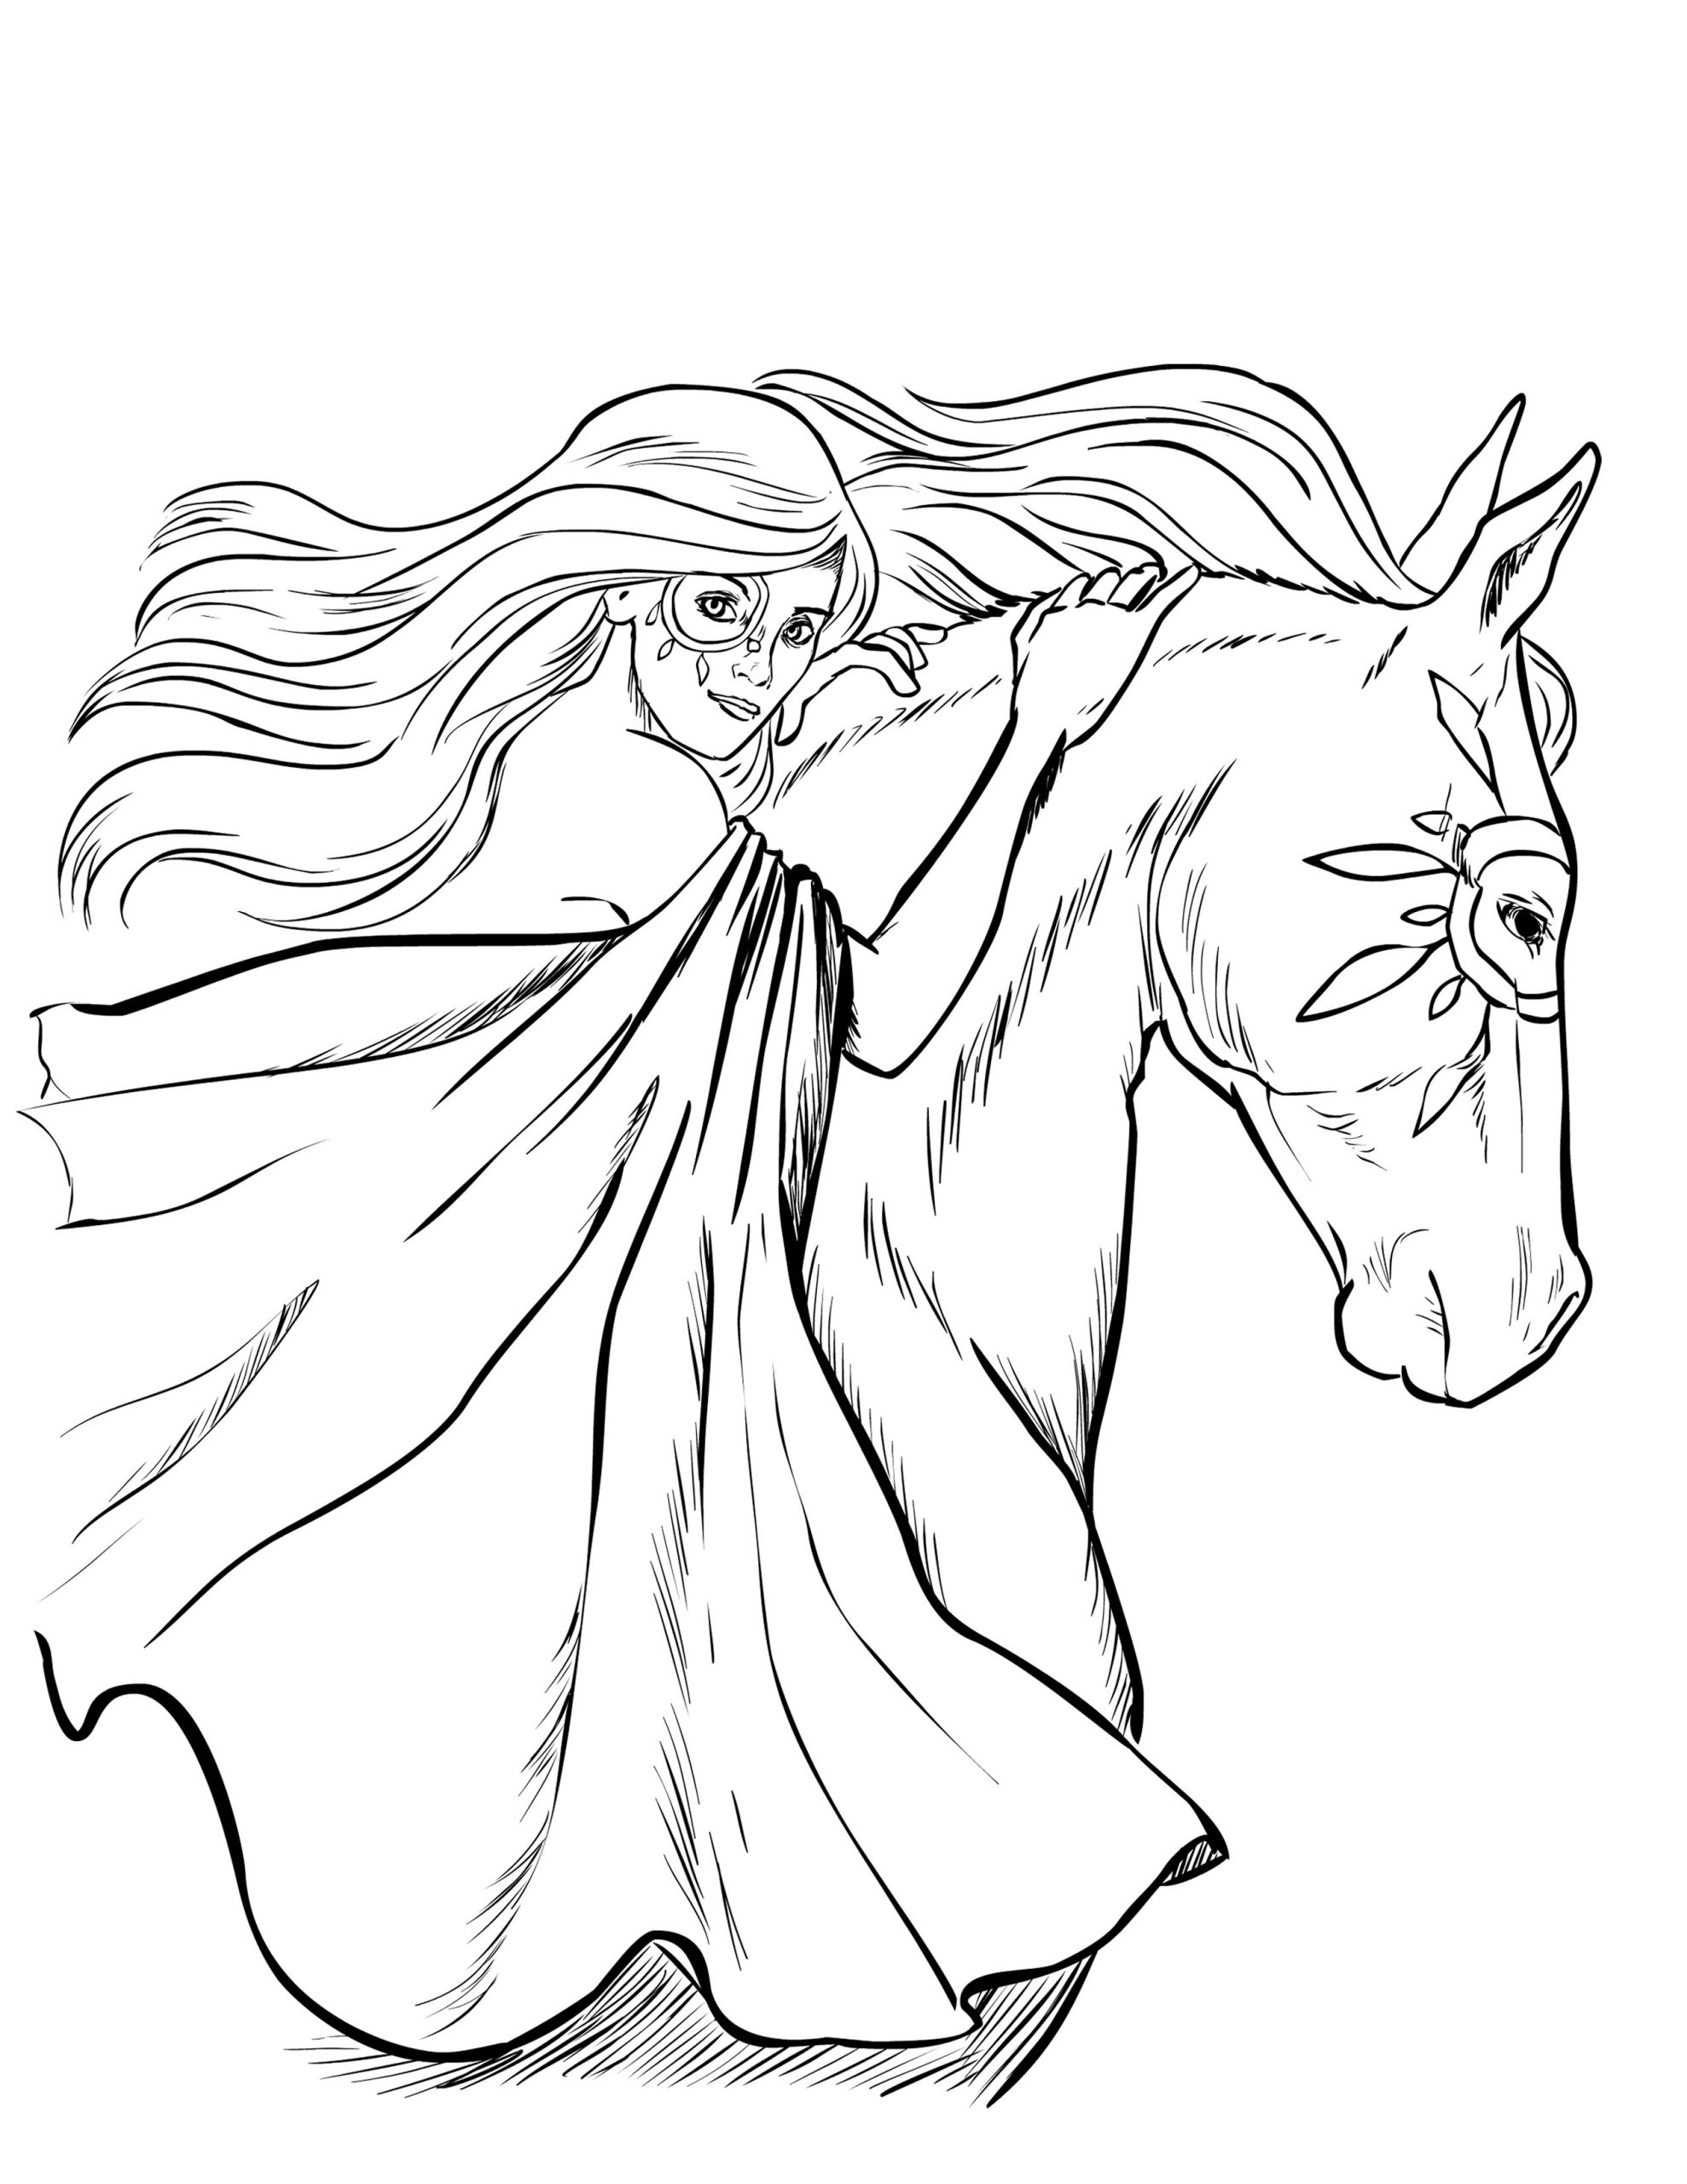 Adult Coloring Book Horse
 FREE HORSE COLORING PAGES